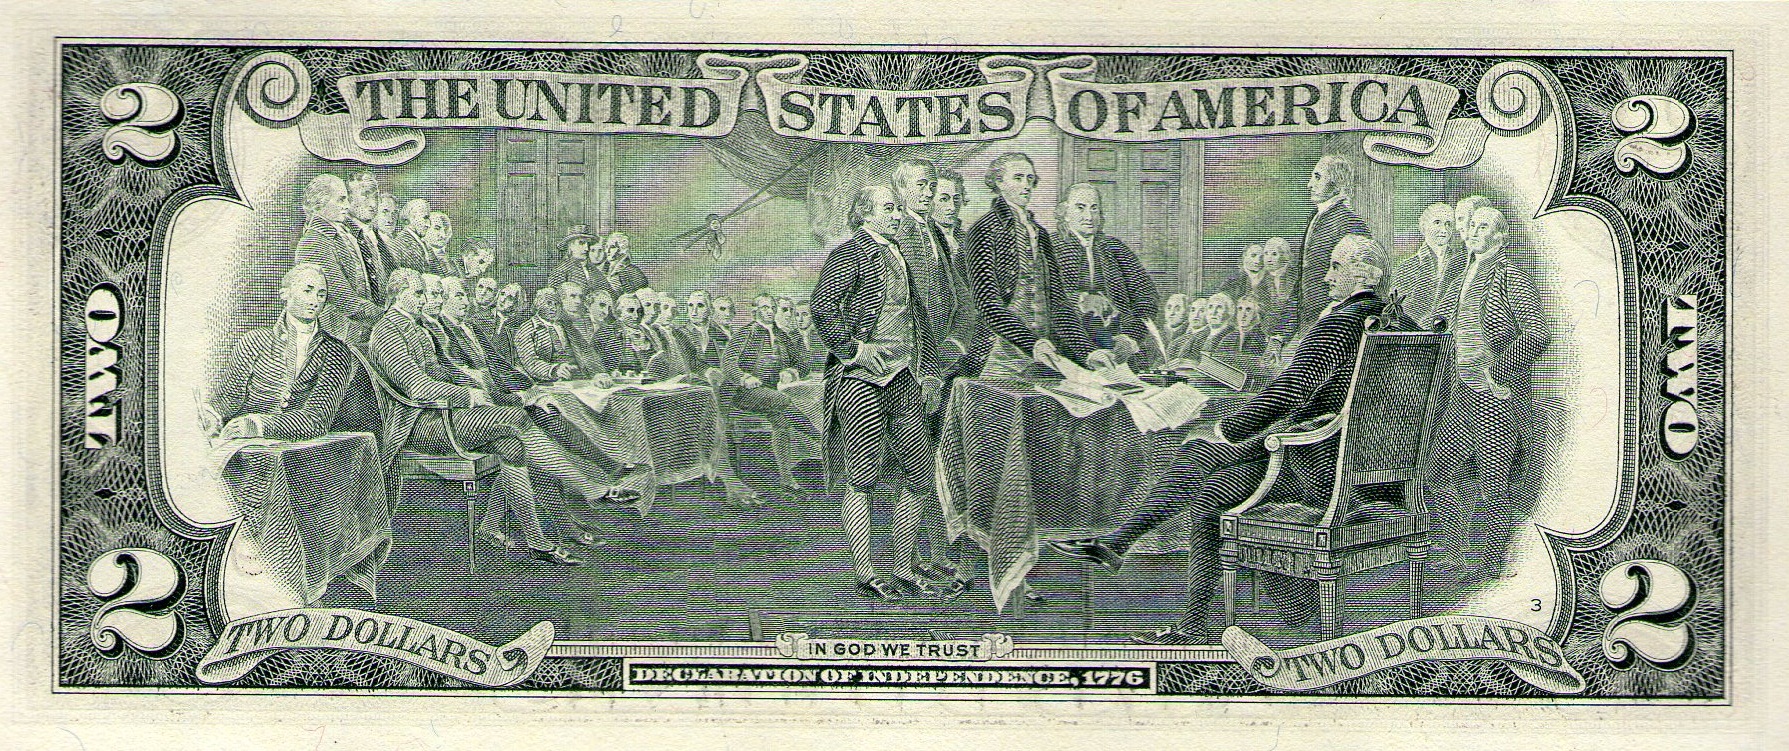 2 Dollar US Banknote from 2003